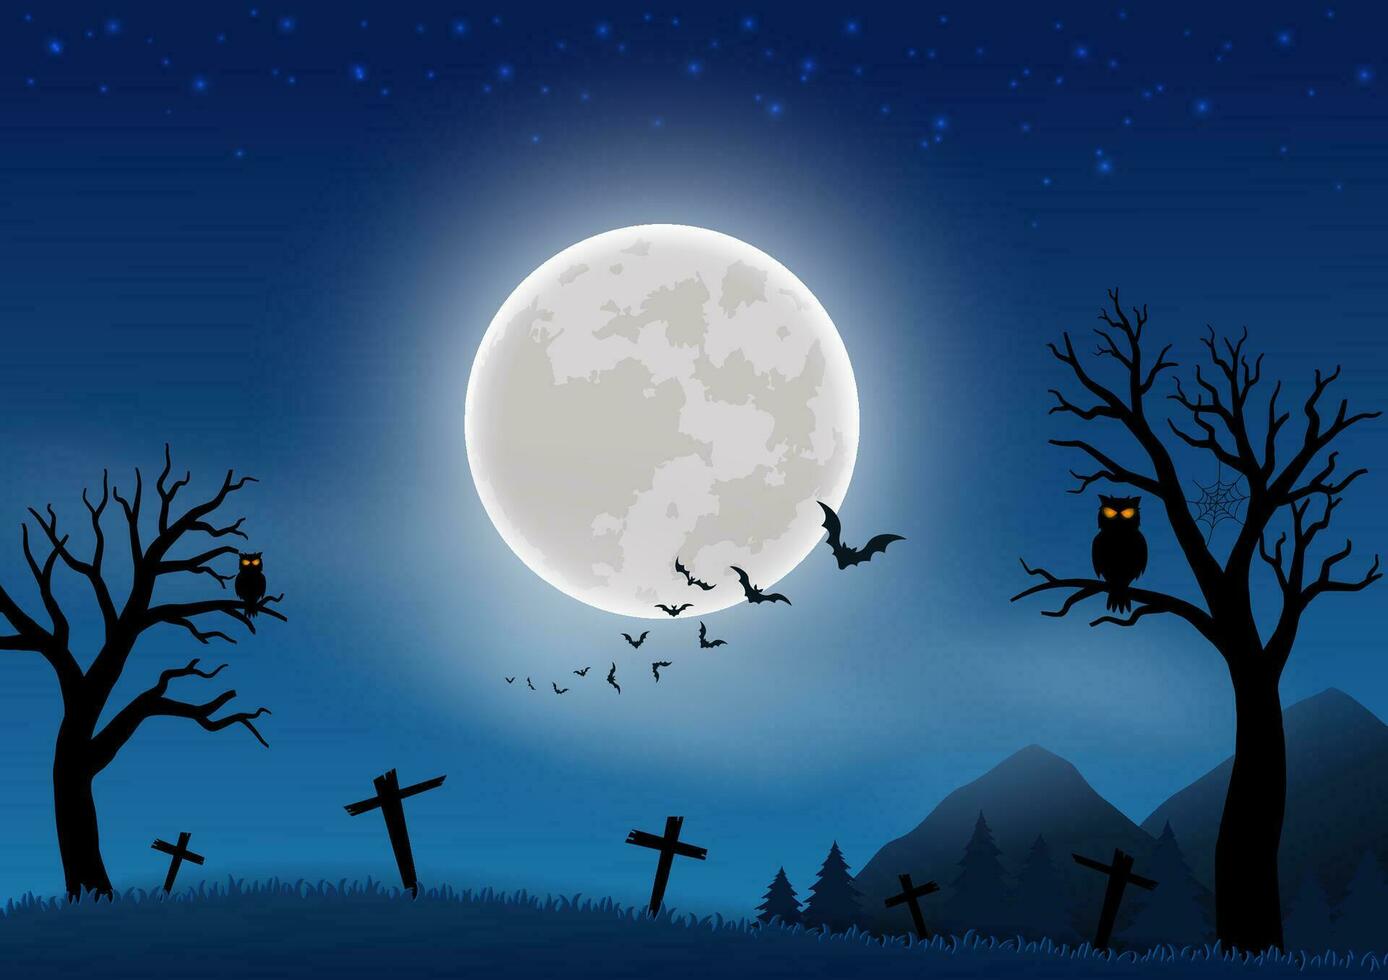 Happy Halloween celebrate theme on night scene background with full moon,bat and graveyard vector